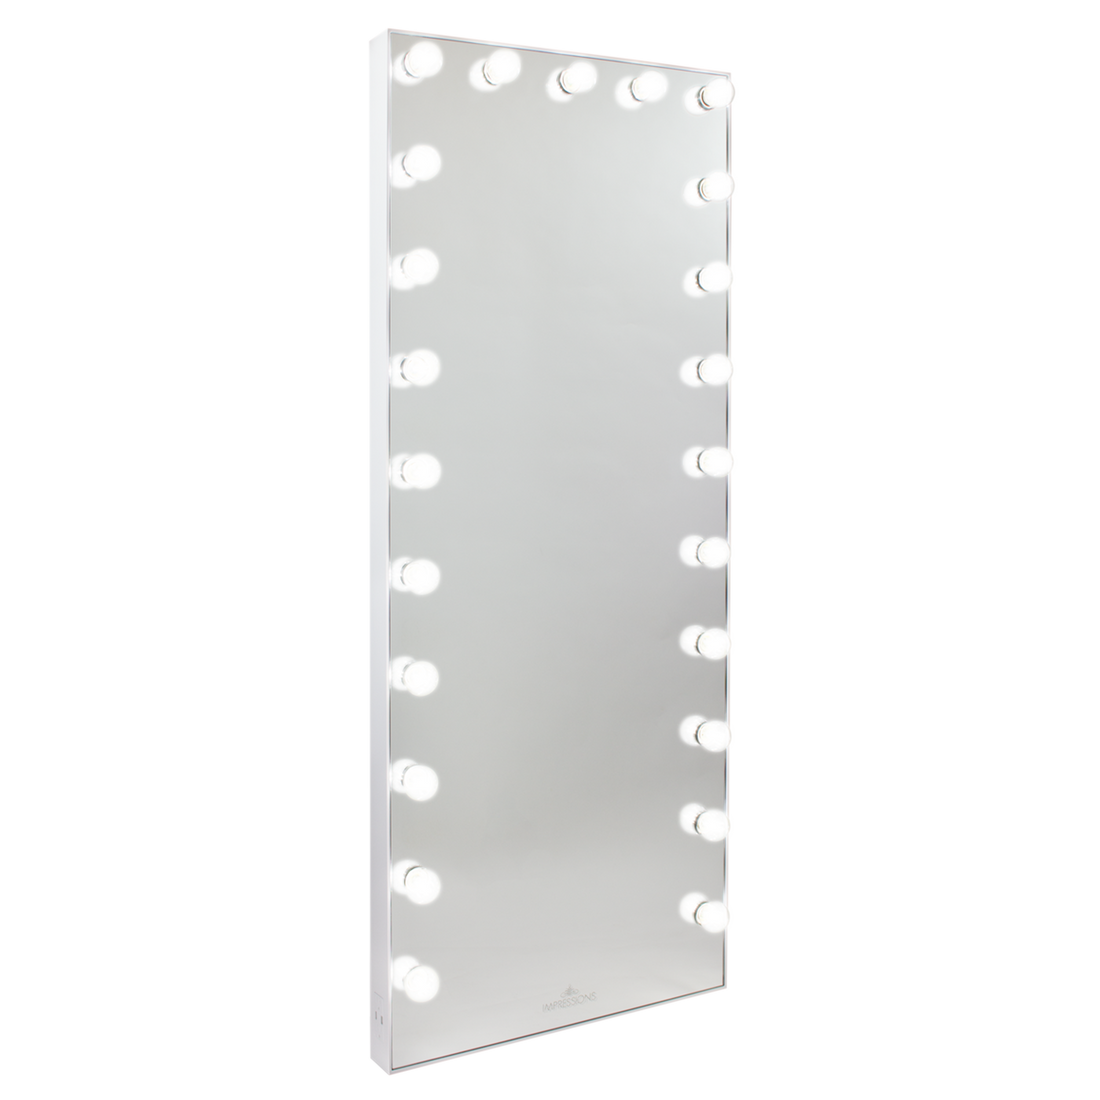 Hollywood Glow fl Vanity Floor Mirror in Glossy White | 24 x 3 x 60.5 in | Impressions Vanity Co. | Aluminum/Glass